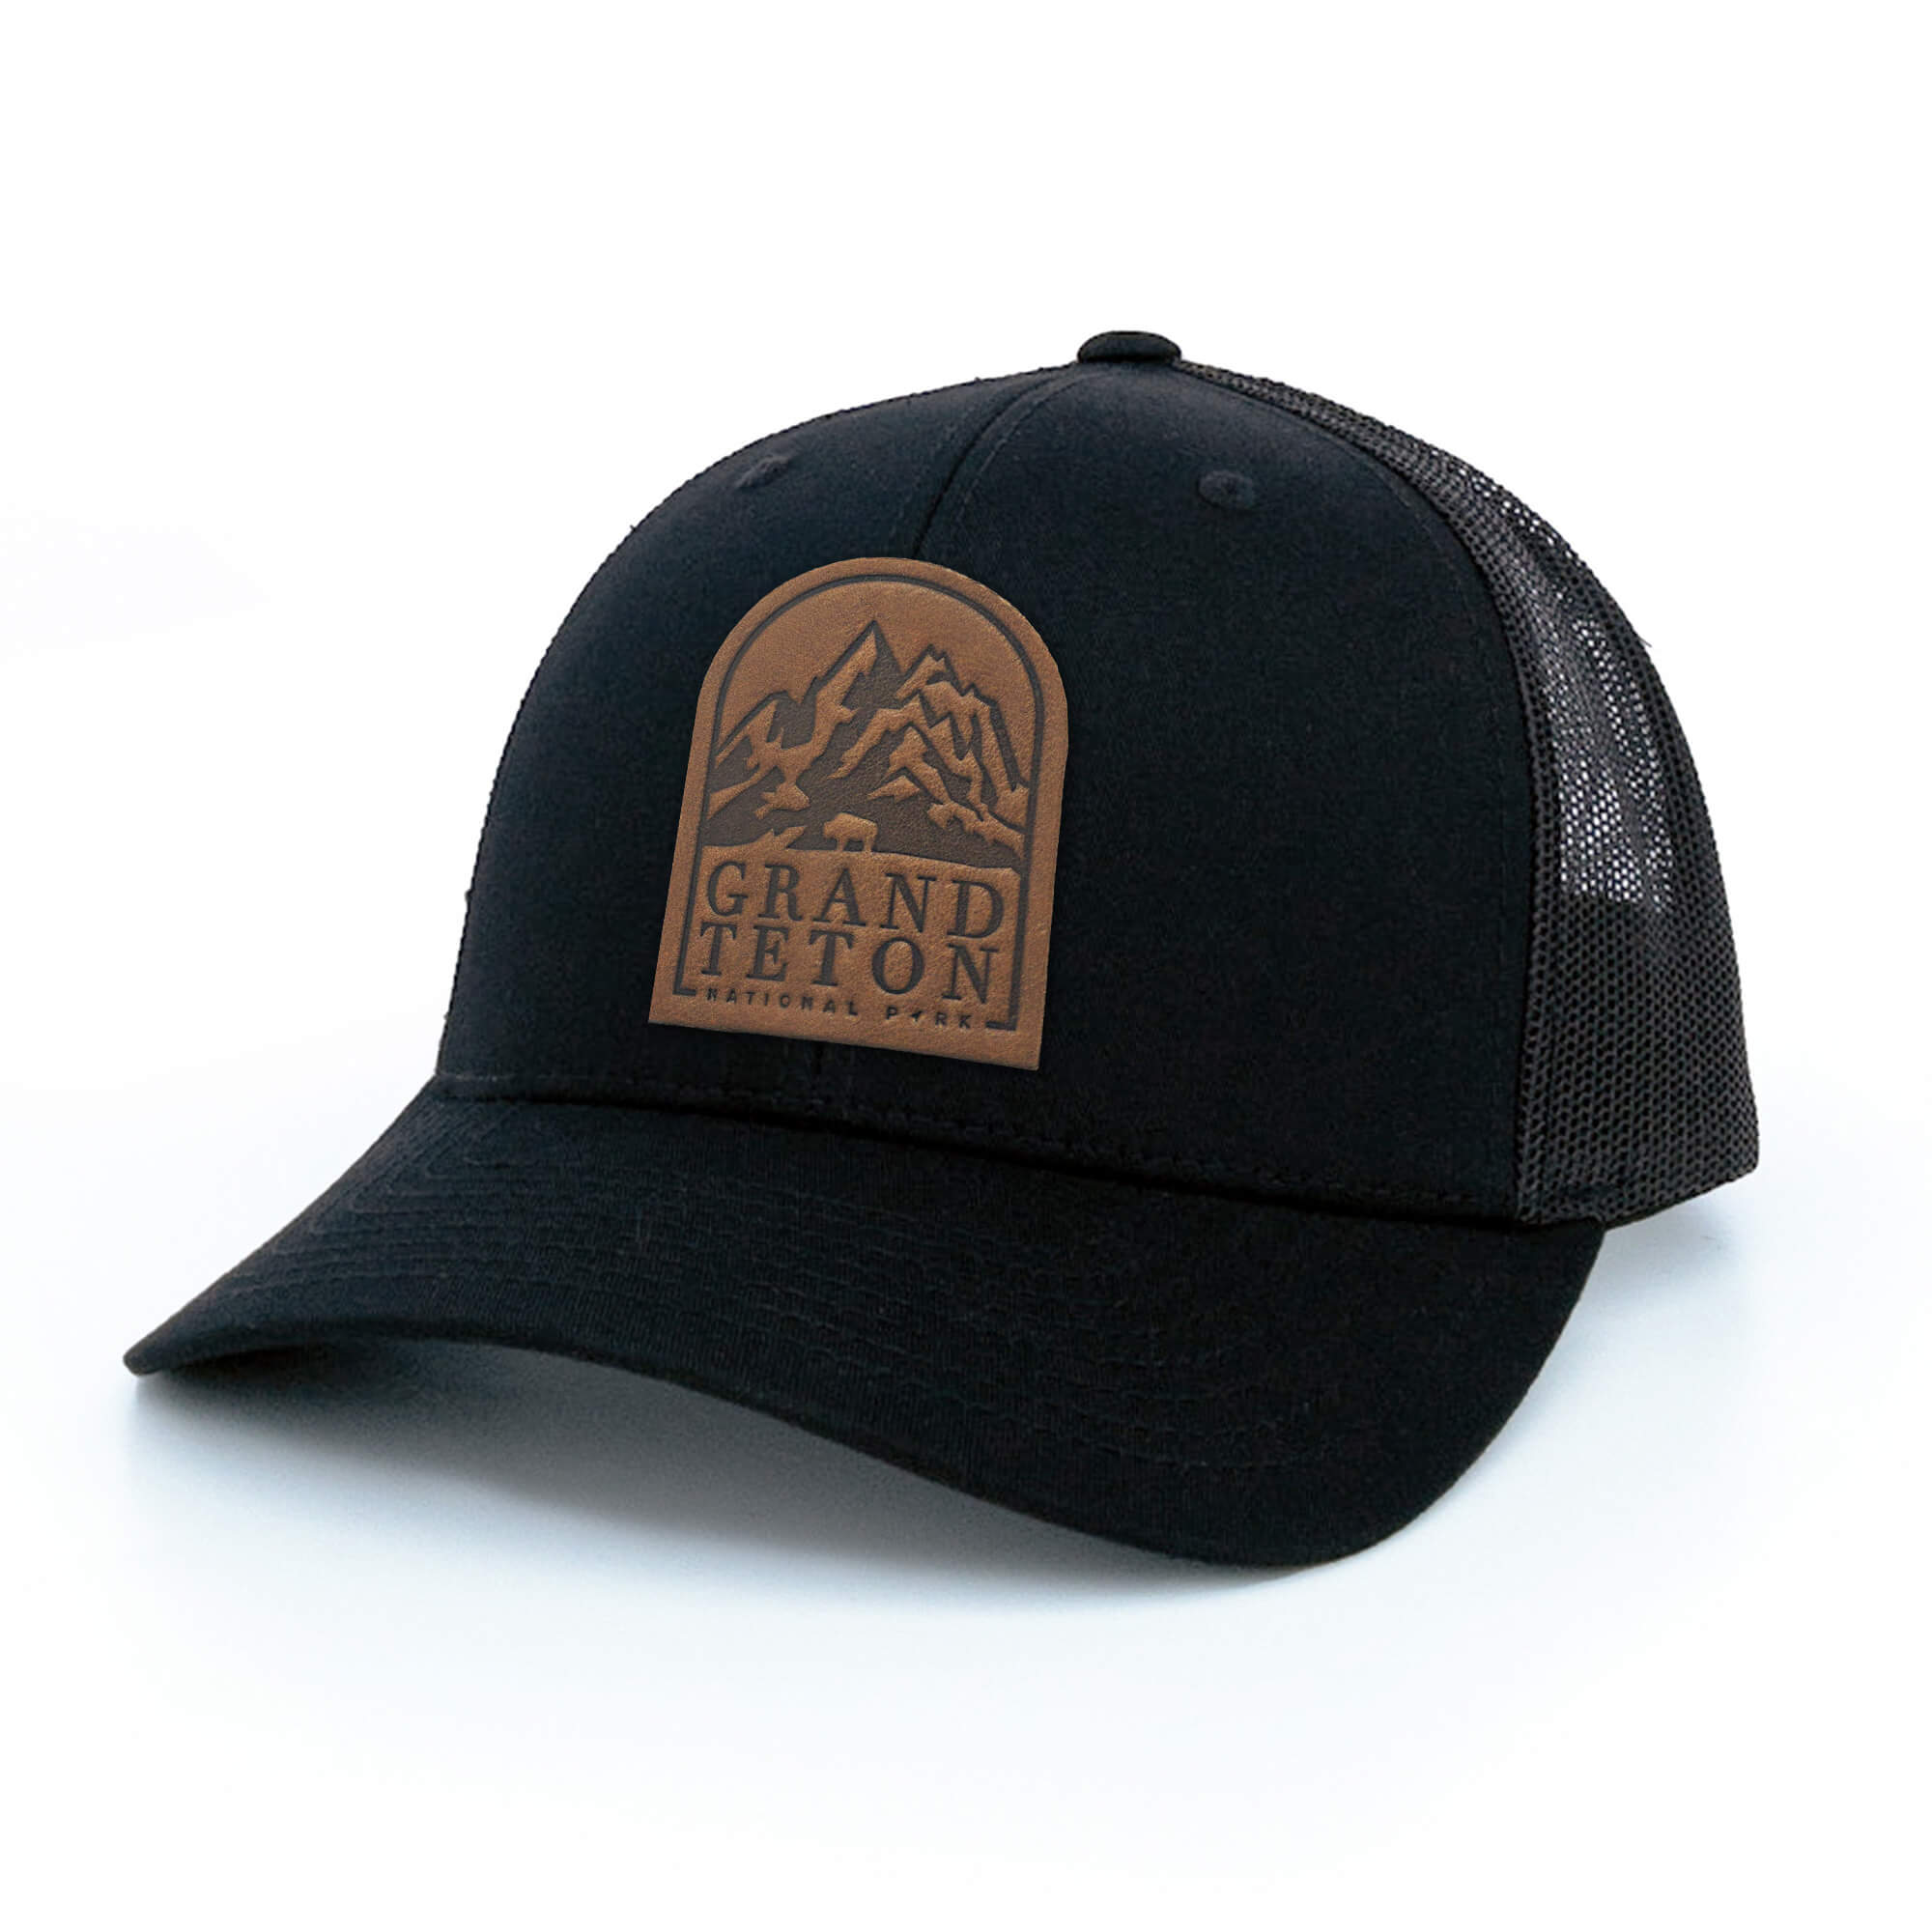 Black trucker hat with full-grain leather patch of Grand Teton National Park | BLACK-007-003, CHARC-007-003, NAVY-007-003, HGREY-007-003, MOSS-007-003, BROWN-007-003